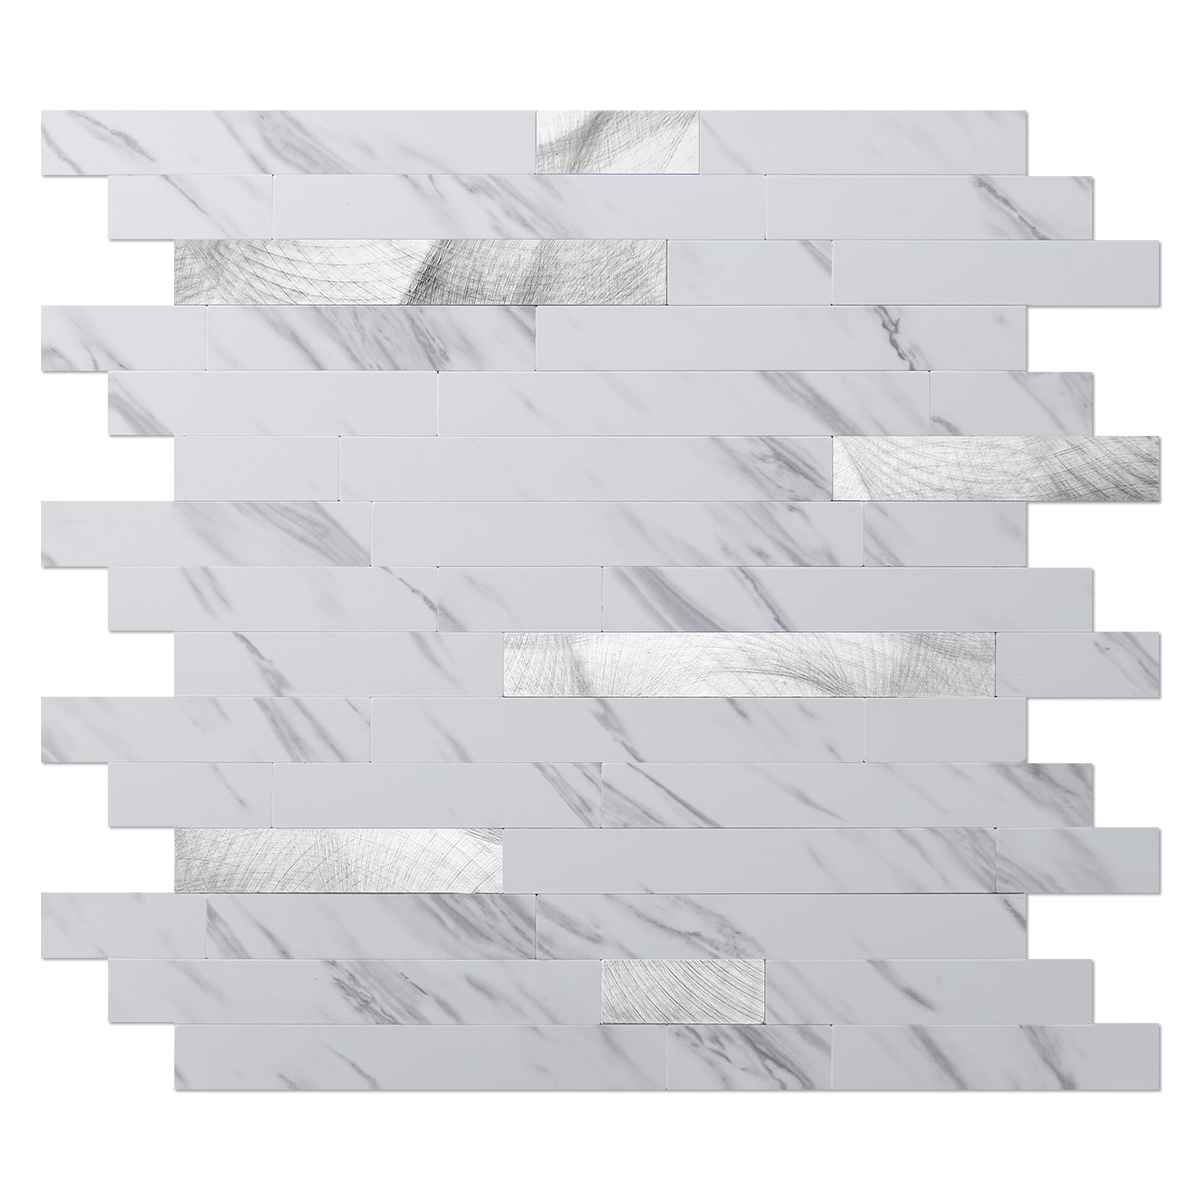 A16641P10-Art3d 10-Sheet Peel and Stick Backsplash Tile for Kitchen Bathroom Fireplace Laundry Room in White Marble Tone